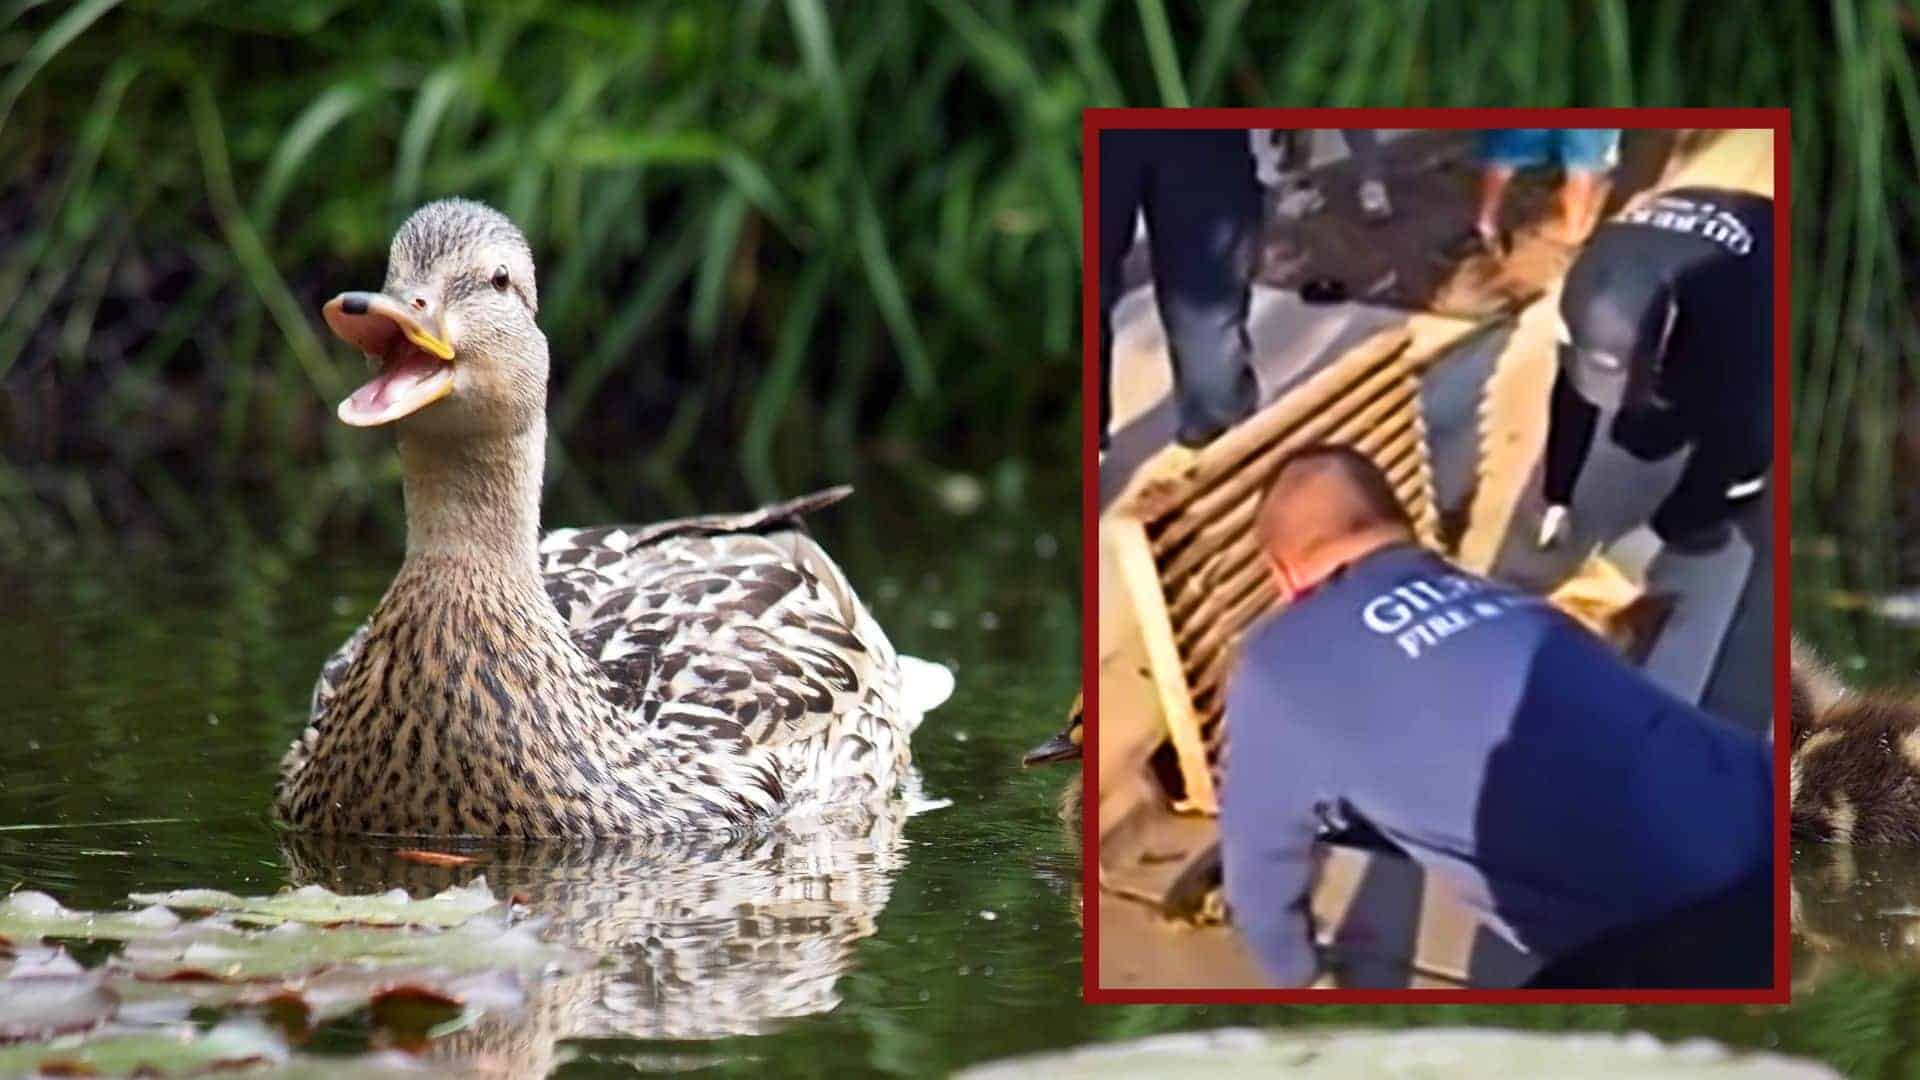 Firefighters Rescue Ducklings